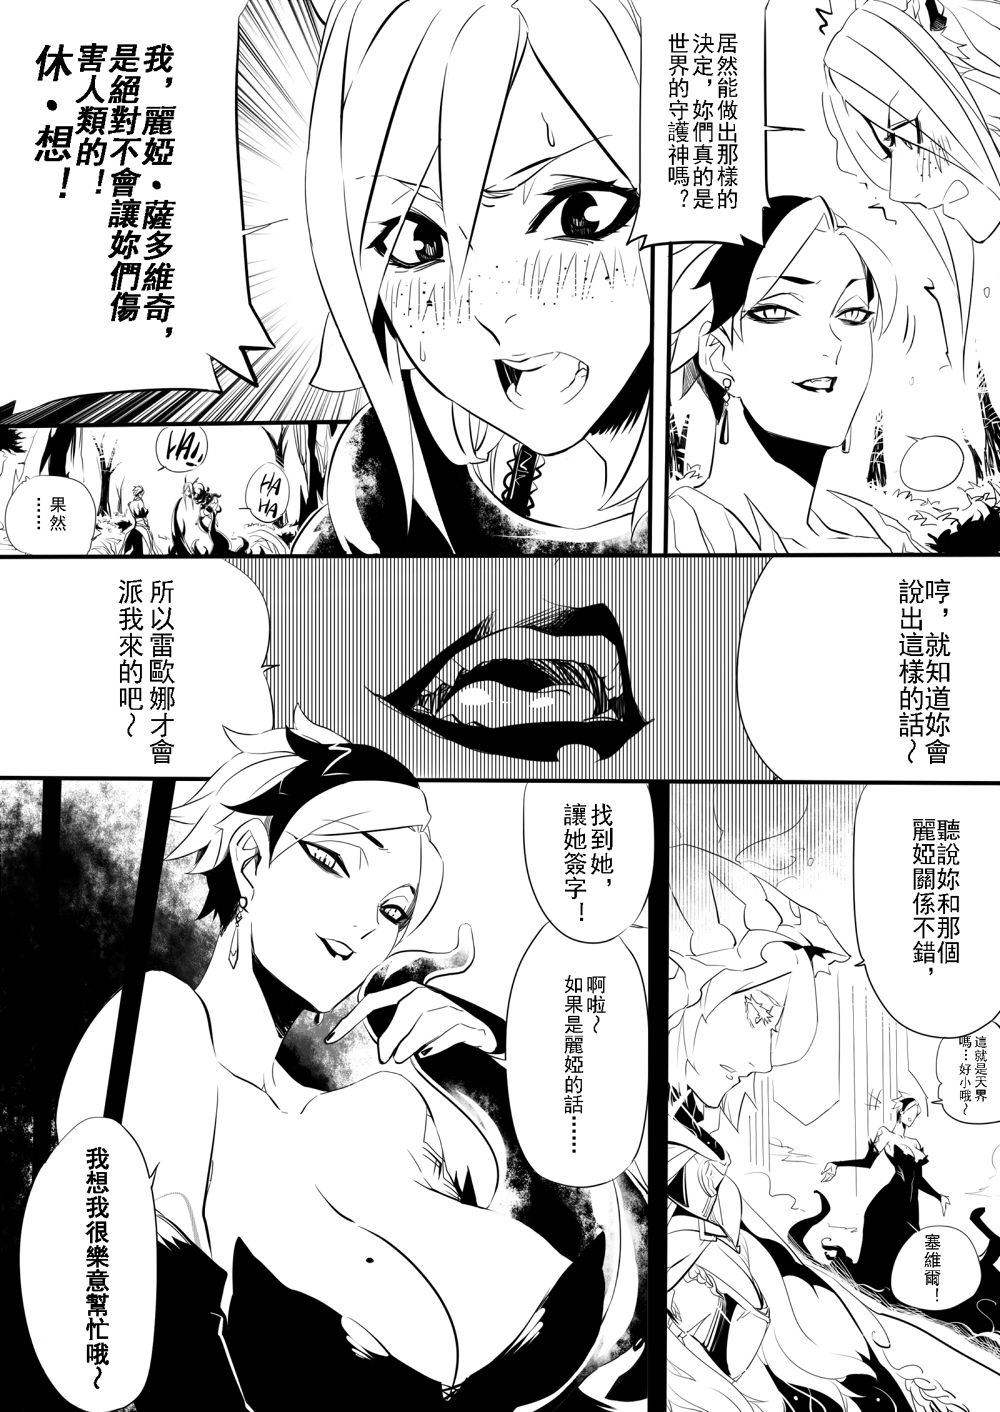 [Electric_Dragon] Seville & Leah [Chinese] [Electric_Dragon] Seville & Leah [中国語]